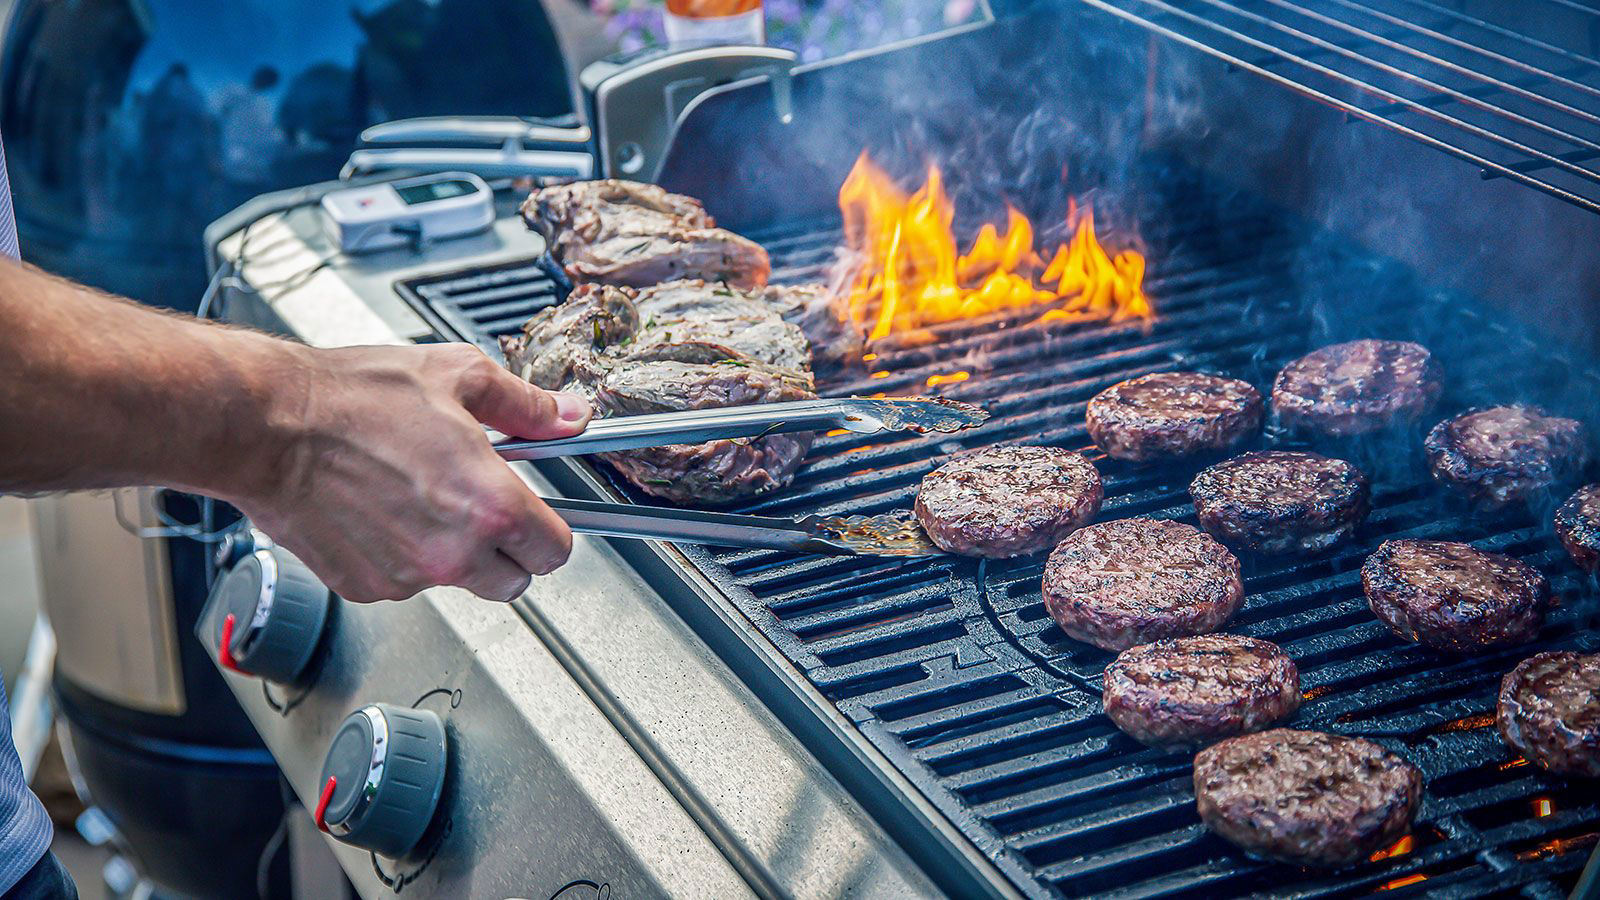 The 5 best ways to organize barbecue equipment – recommended by pros